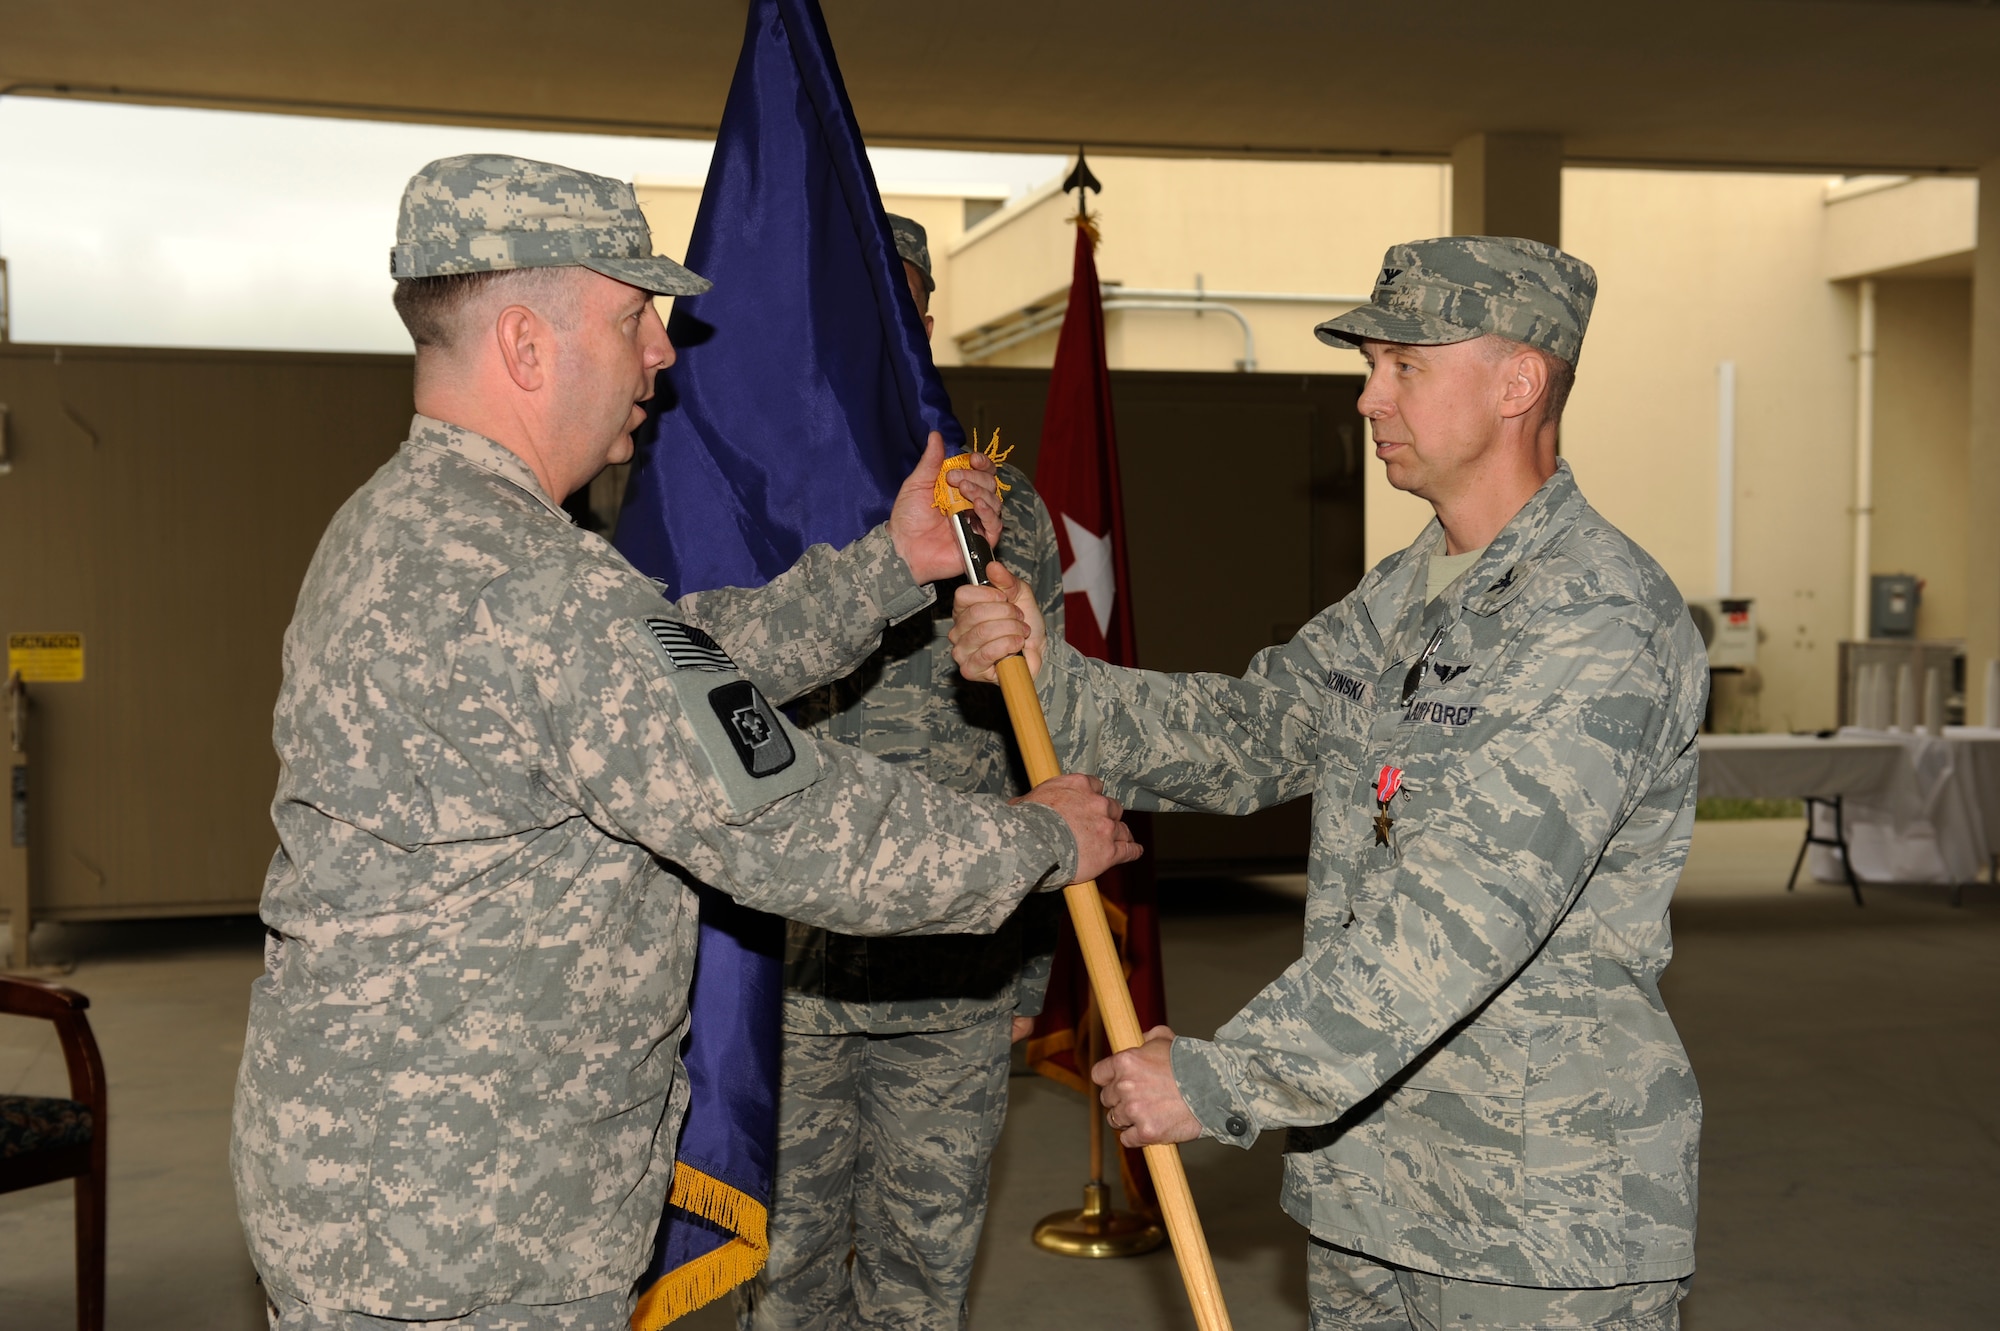 U.S. Army Col. John Collins, commander, Task Force 62nd Medical Brigade, accepts the guidon as U.S. Air Force Col. (Dr.) Joseph Chozinski, 455th Expeditionary Medical Group/ Task Force Medical East, relinquishes command during a change of command ceremony at Bagram Airfield, Afghanistan, May 4, 2010. (U.S. Air Force photo by/ Master Sgt. Jeromy K. Cross/released)